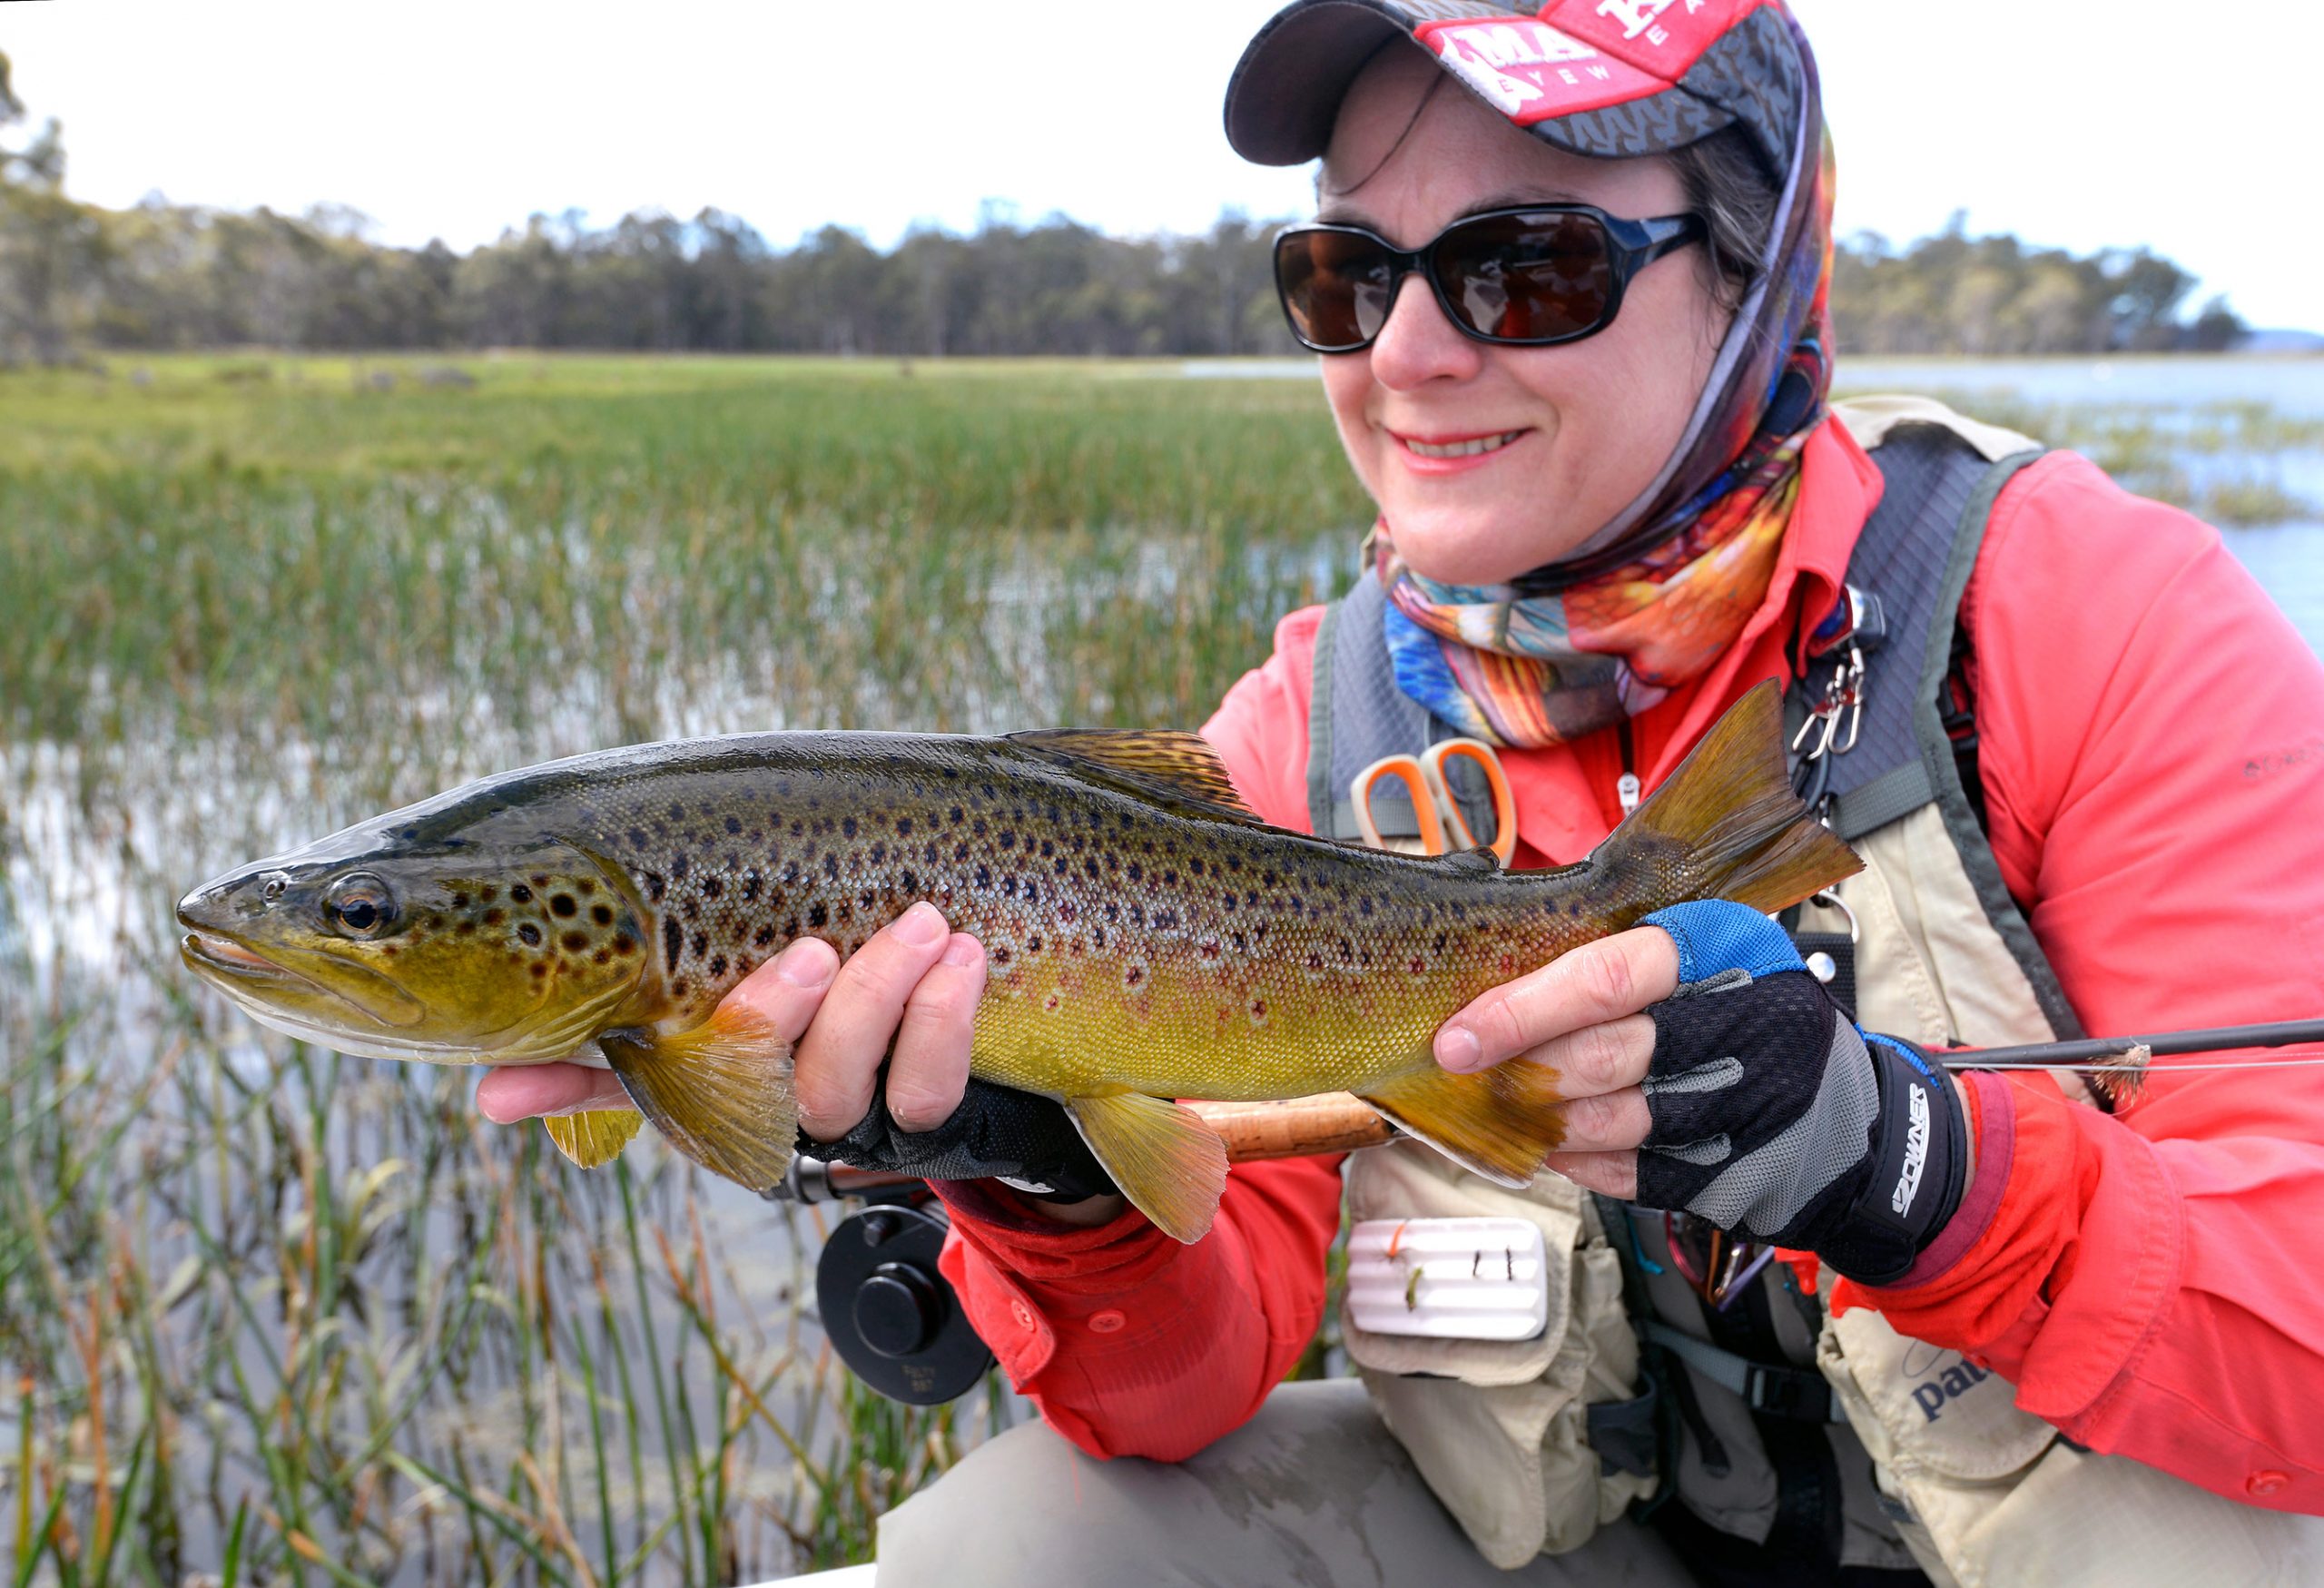 Jo with a lovely Penstock brownie taken in the margins on a single dry fly presented on a long, fine tippet.